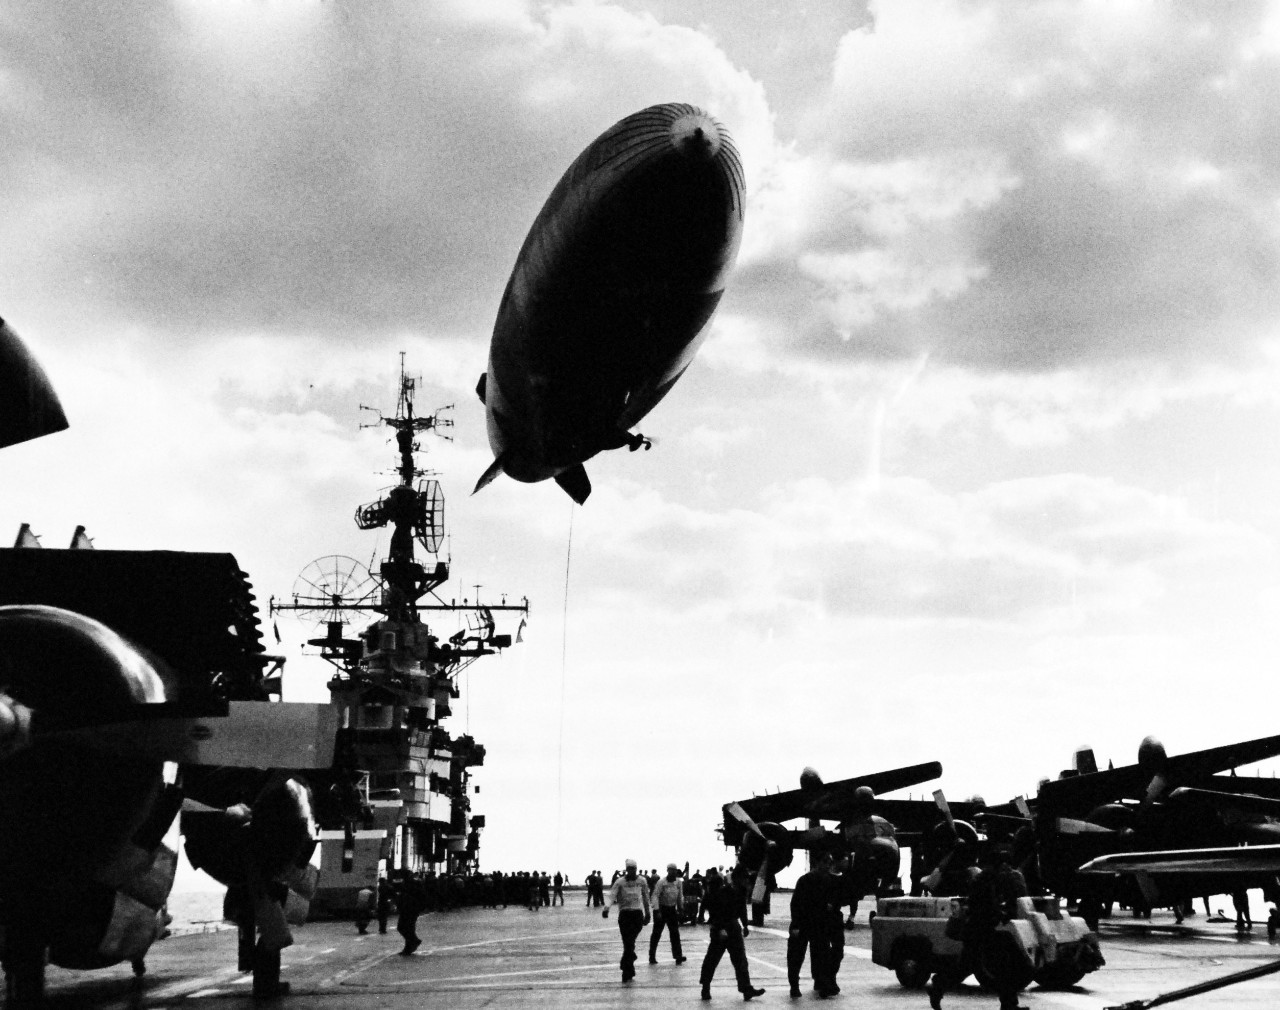 330-PS-7632 (USN 683366):  USS Leyte (CVS-32), 1955.    An airship from U.S. Naval Air Station, Lakehurst, New Jersey, refuels from USS Leyte (CV-32) during Atlantic Fleet Amphibious Operations off Cape Hatteras, November 2, 1955.   The airship was part of a Taskforce providing round-the-clock anti-submarine warfare cover for the amphibious forces.  Leyte pumped 500 gallons of fuel to the airship through a 300-foot hose while maintaining a speed of 20 knots.  Photograph released December 19, 1955.   Official U.S. Navy Photograph, now in the collections of the National Archives.    (2015/2/18).   